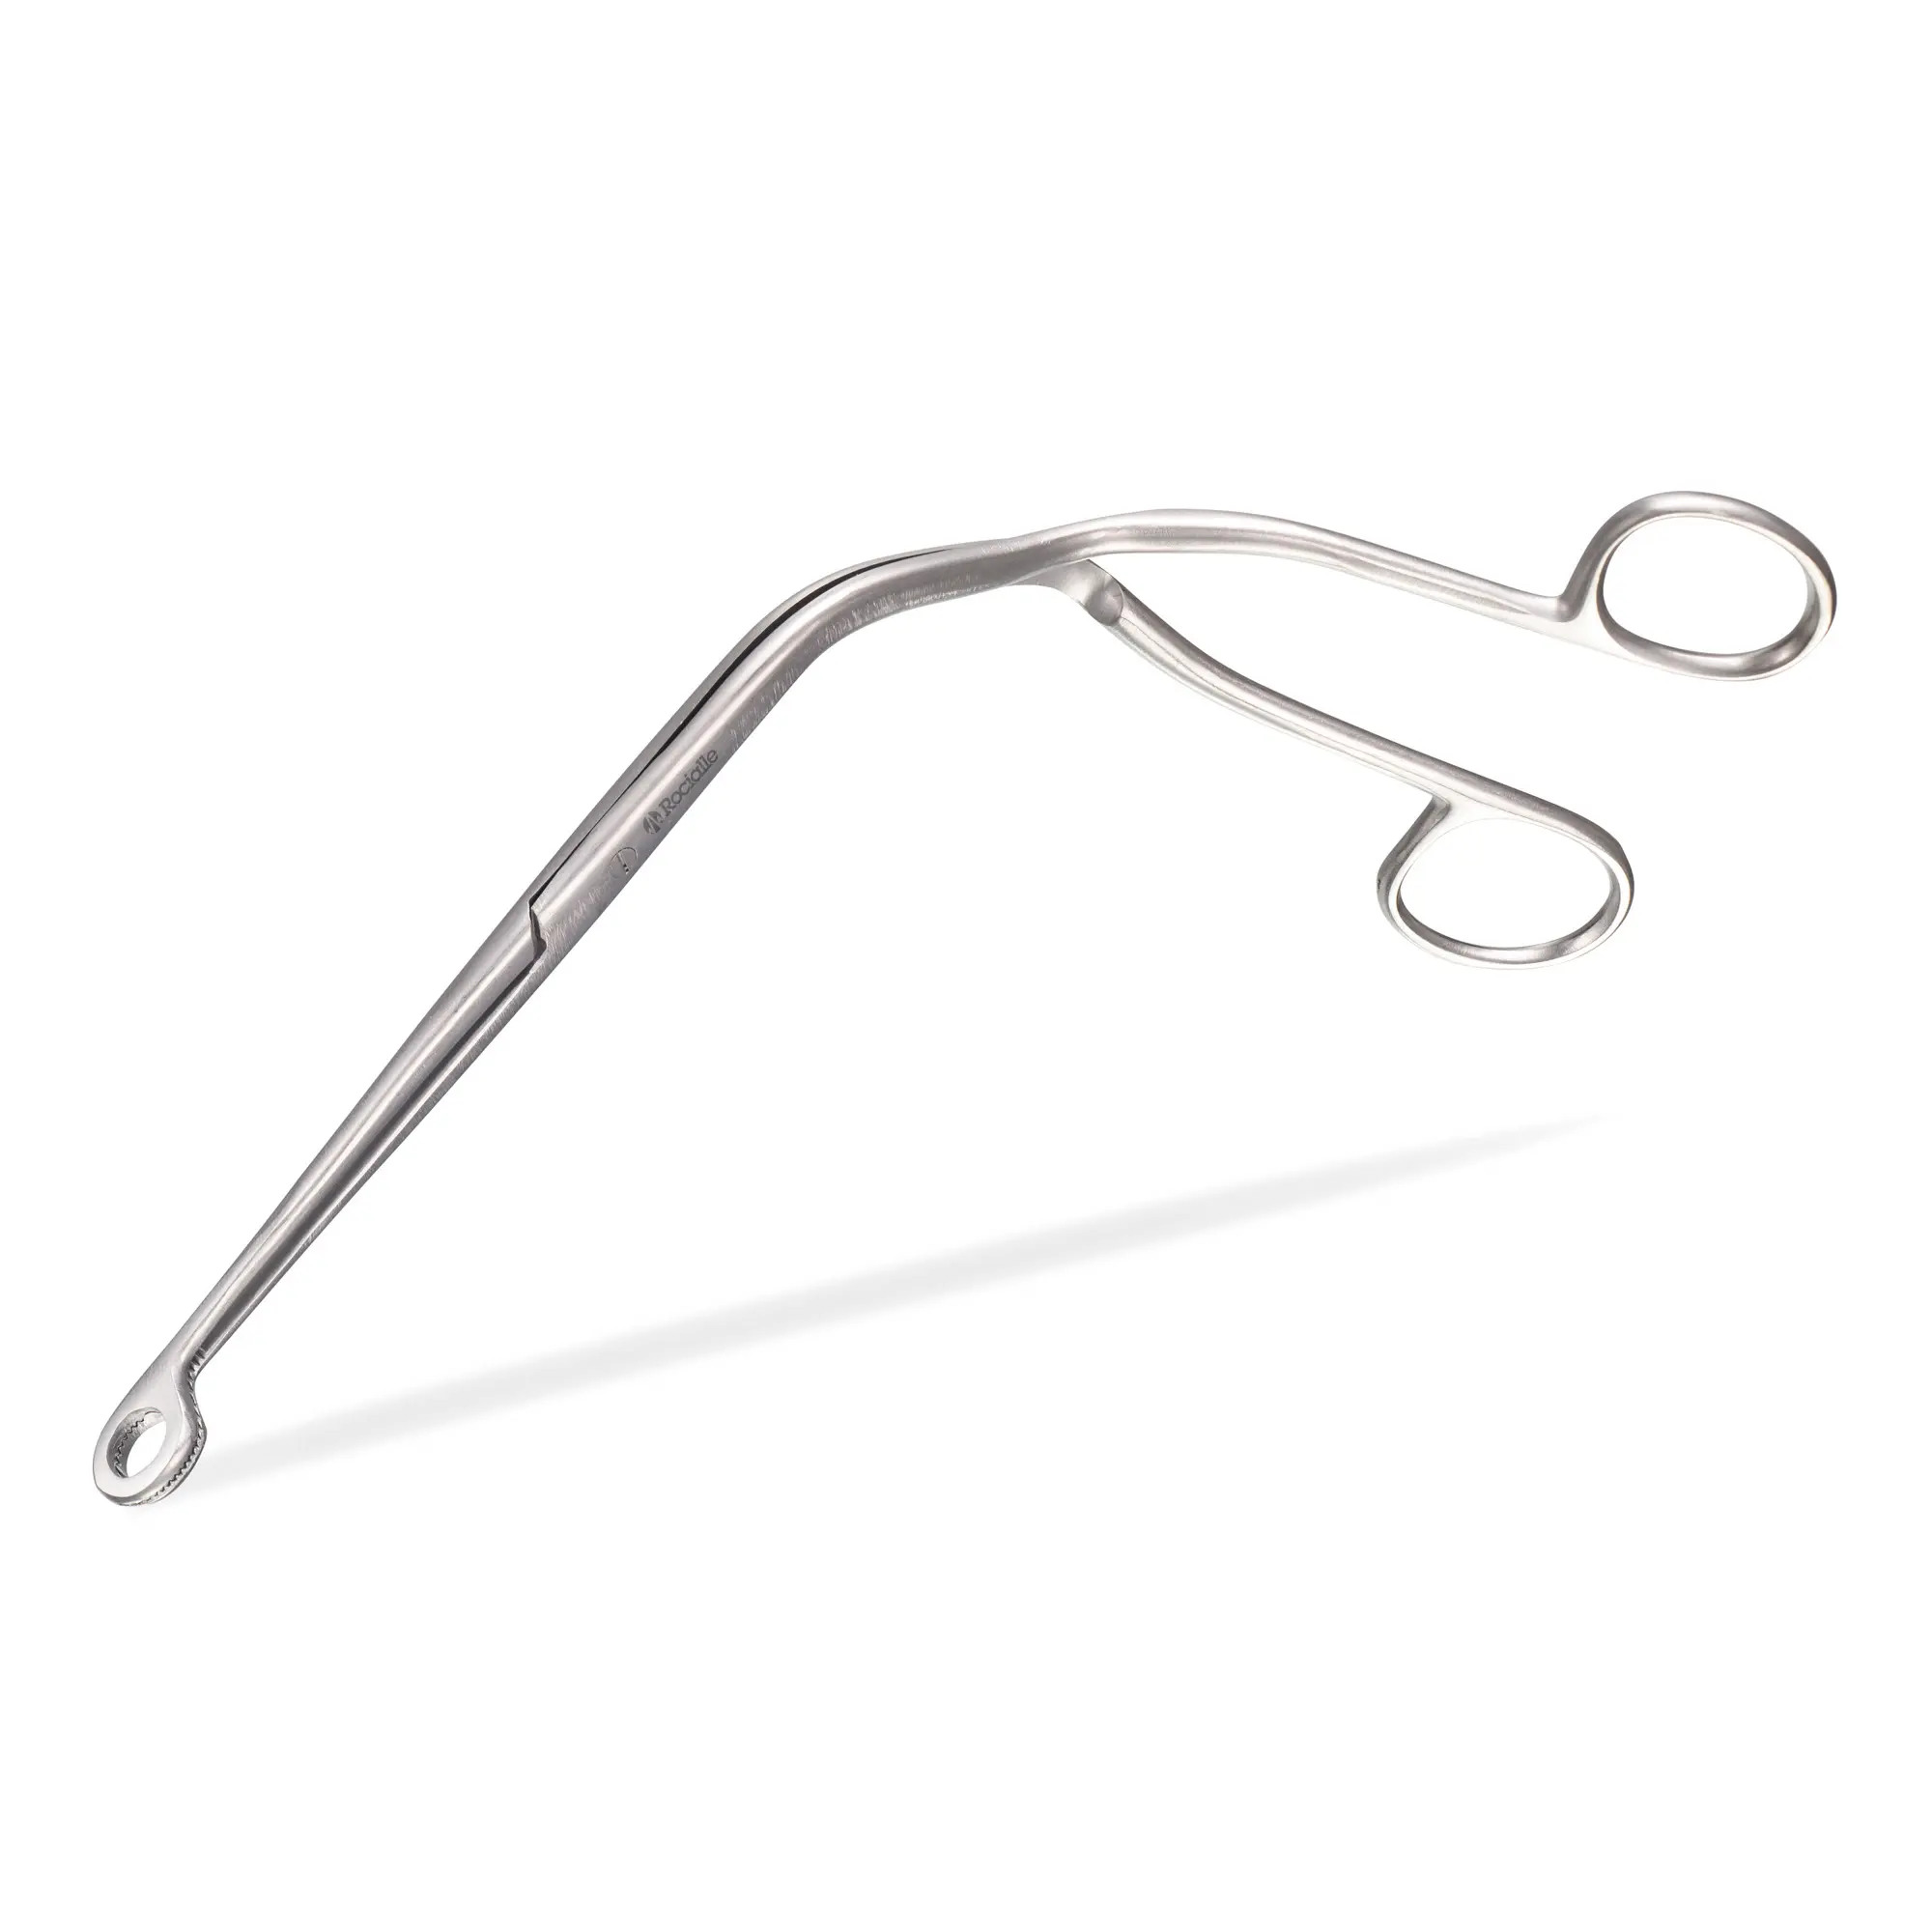 Introduction to Magill Forceps